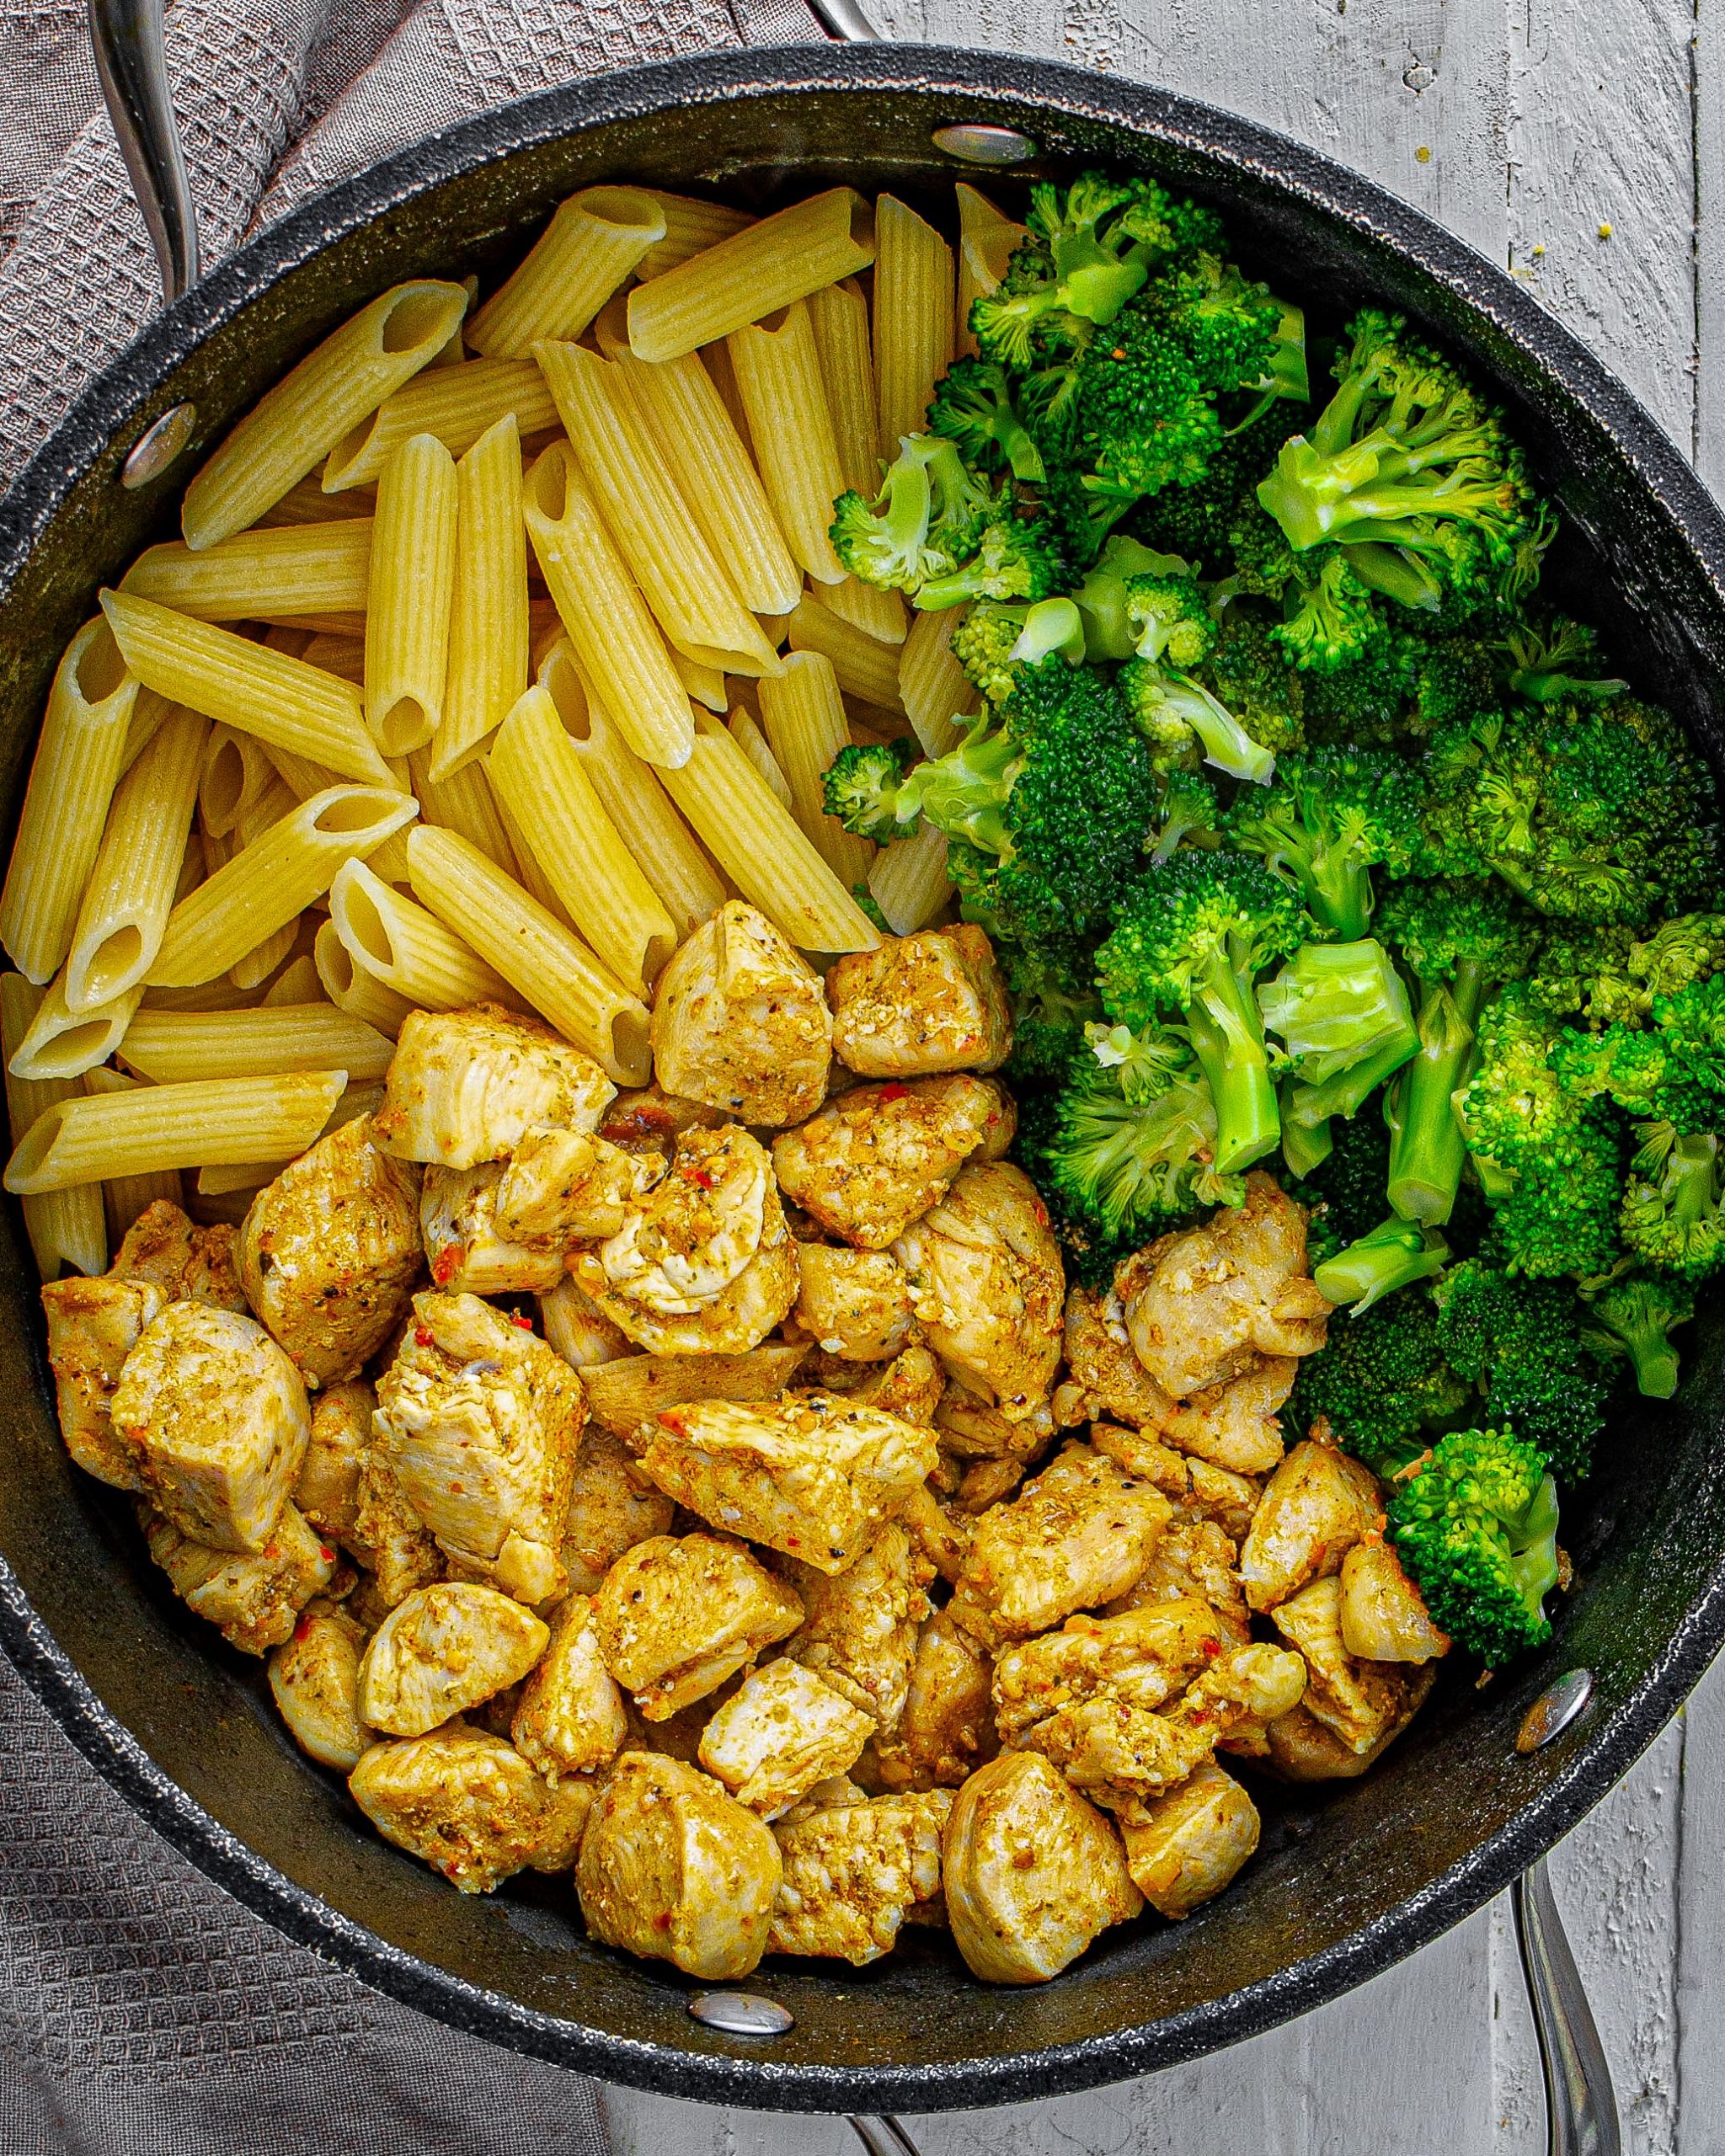 Add the cooked pasta, broccoli, and chicken to a large pot or bowl.